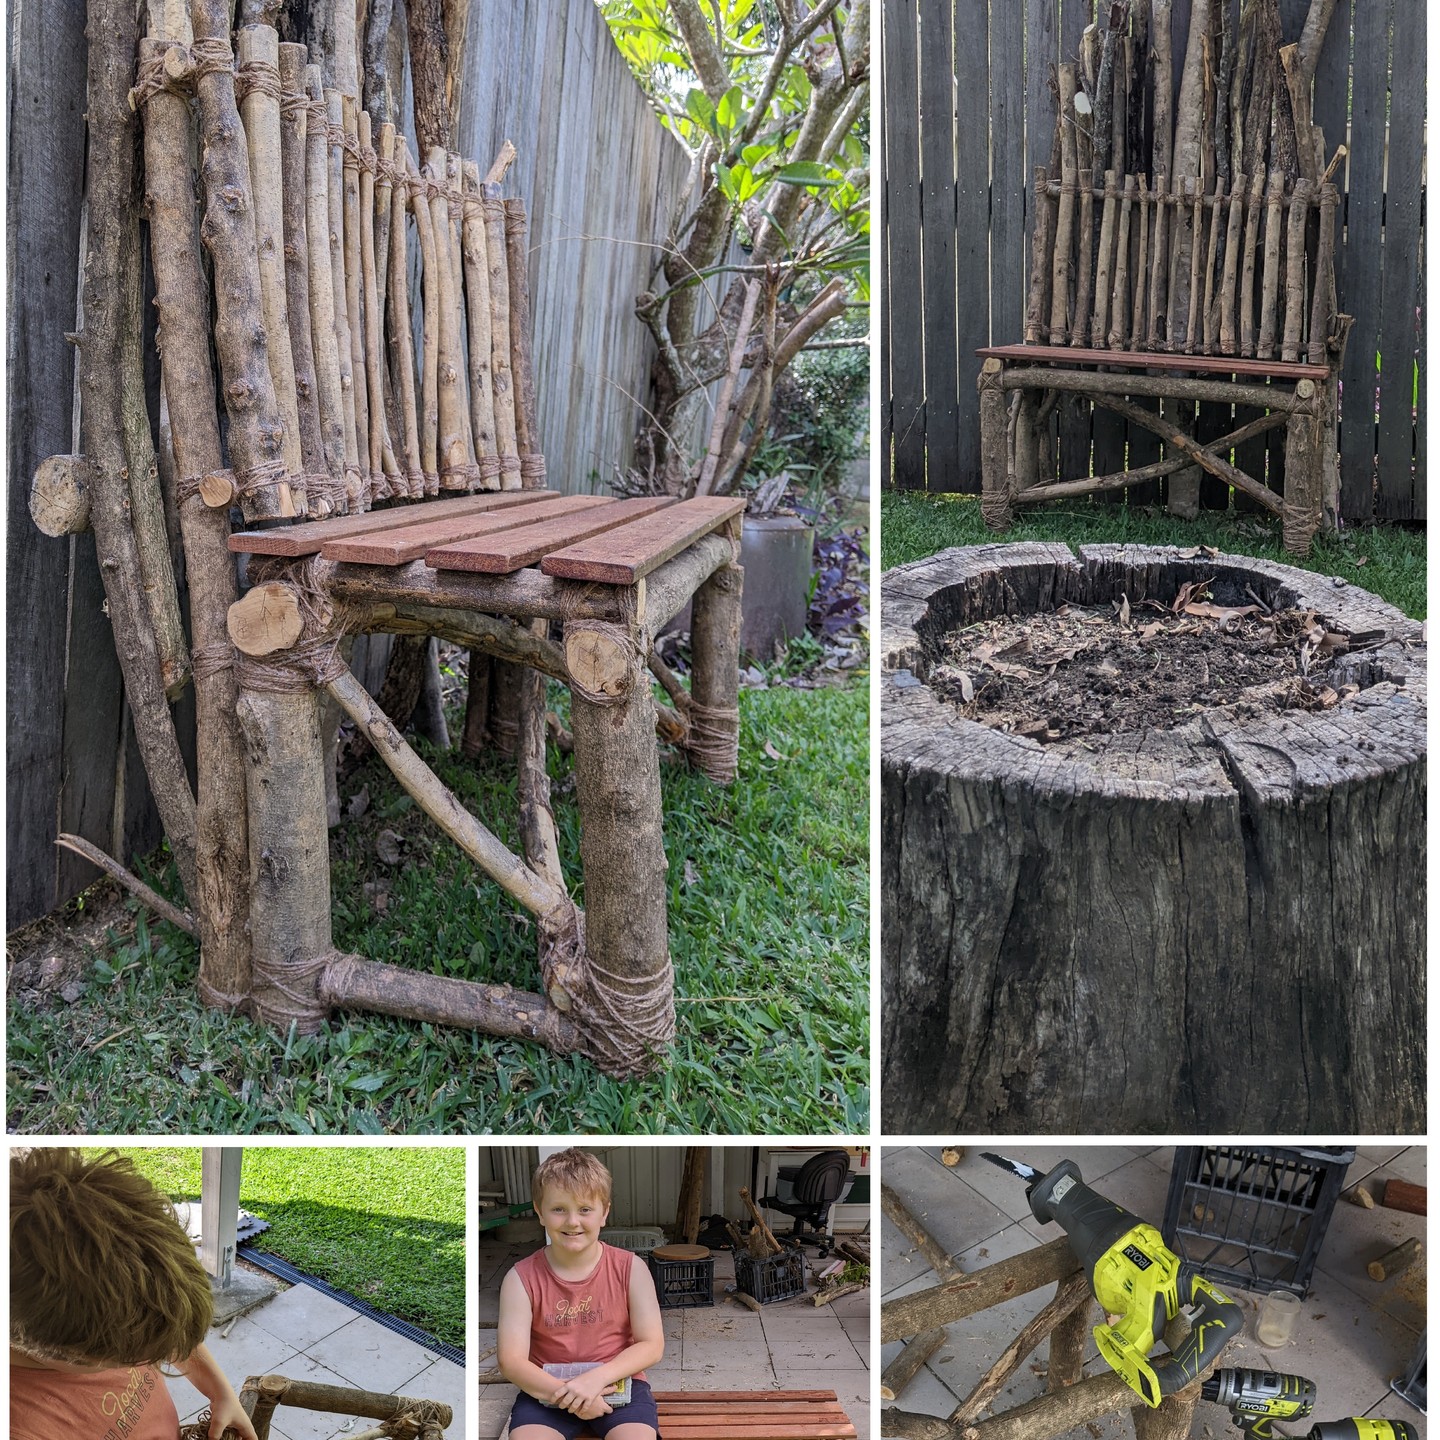 A father son project Viking Chair. After a big prune of the backyard trees with the Ryobi reciprocal saw my youngest son said we should make something, maybe a chair for two. So we got the Ryobi team together and used some left over screws for strength of the frame, but then used twine to make it look old style, and painted everything with PVA glue. Some left over merbau screening made for a good seat section, and it is much more comfortable than it looks. 
I saw the Ryobi long weekend competition so here it is, can always make use of more Ryobi tools #ryobimade #ryobiau ryobiau